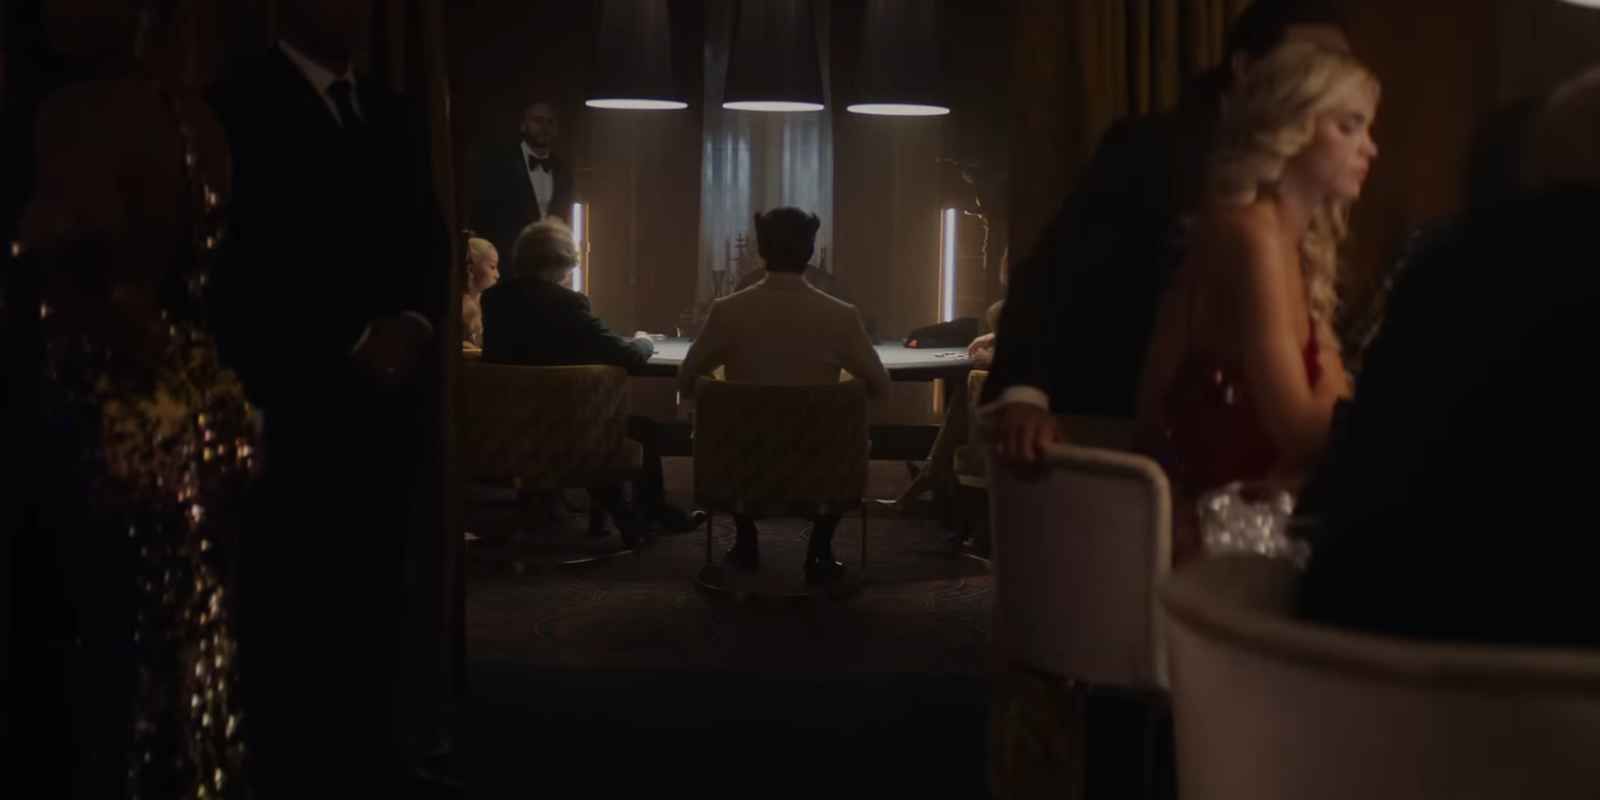 A wide-shot of people in a casino-like setting with Wolverine at the center, wearing a white suit with his back turned to the camera.